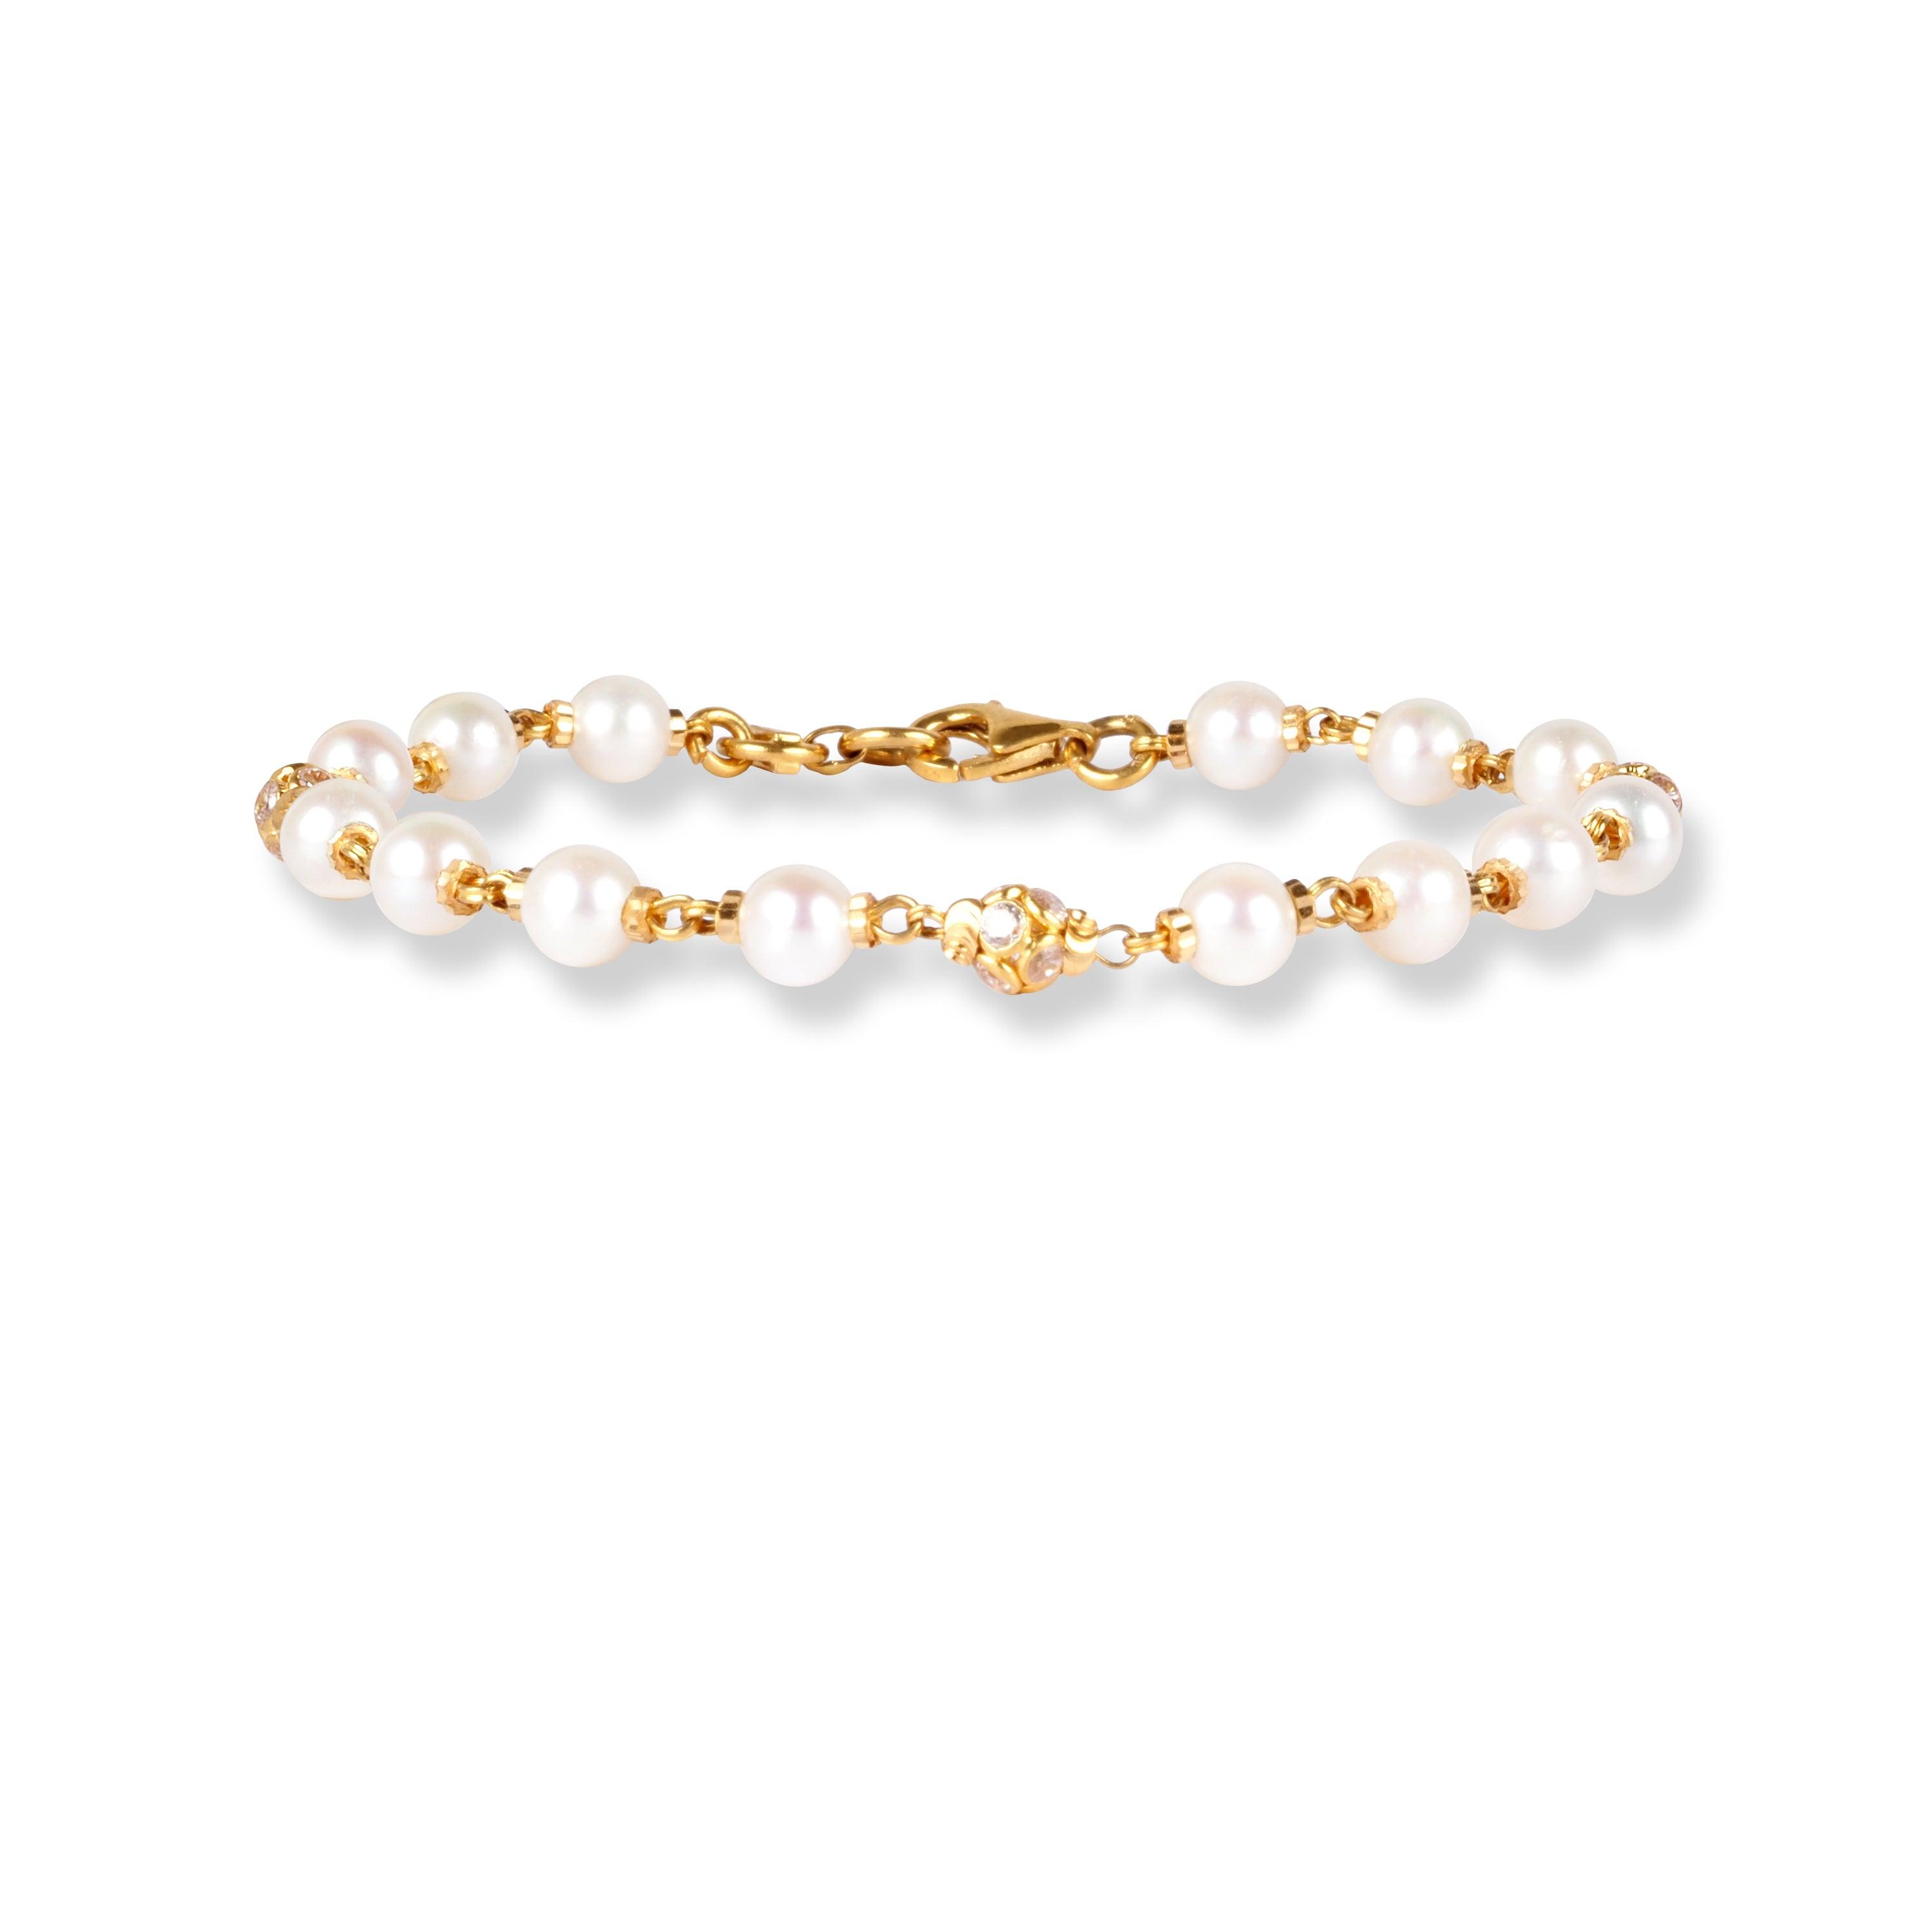 22ct Gold Bracelet with Pearl and Cubic Zirconia Stones LBR-7130 - Minar Jewellers